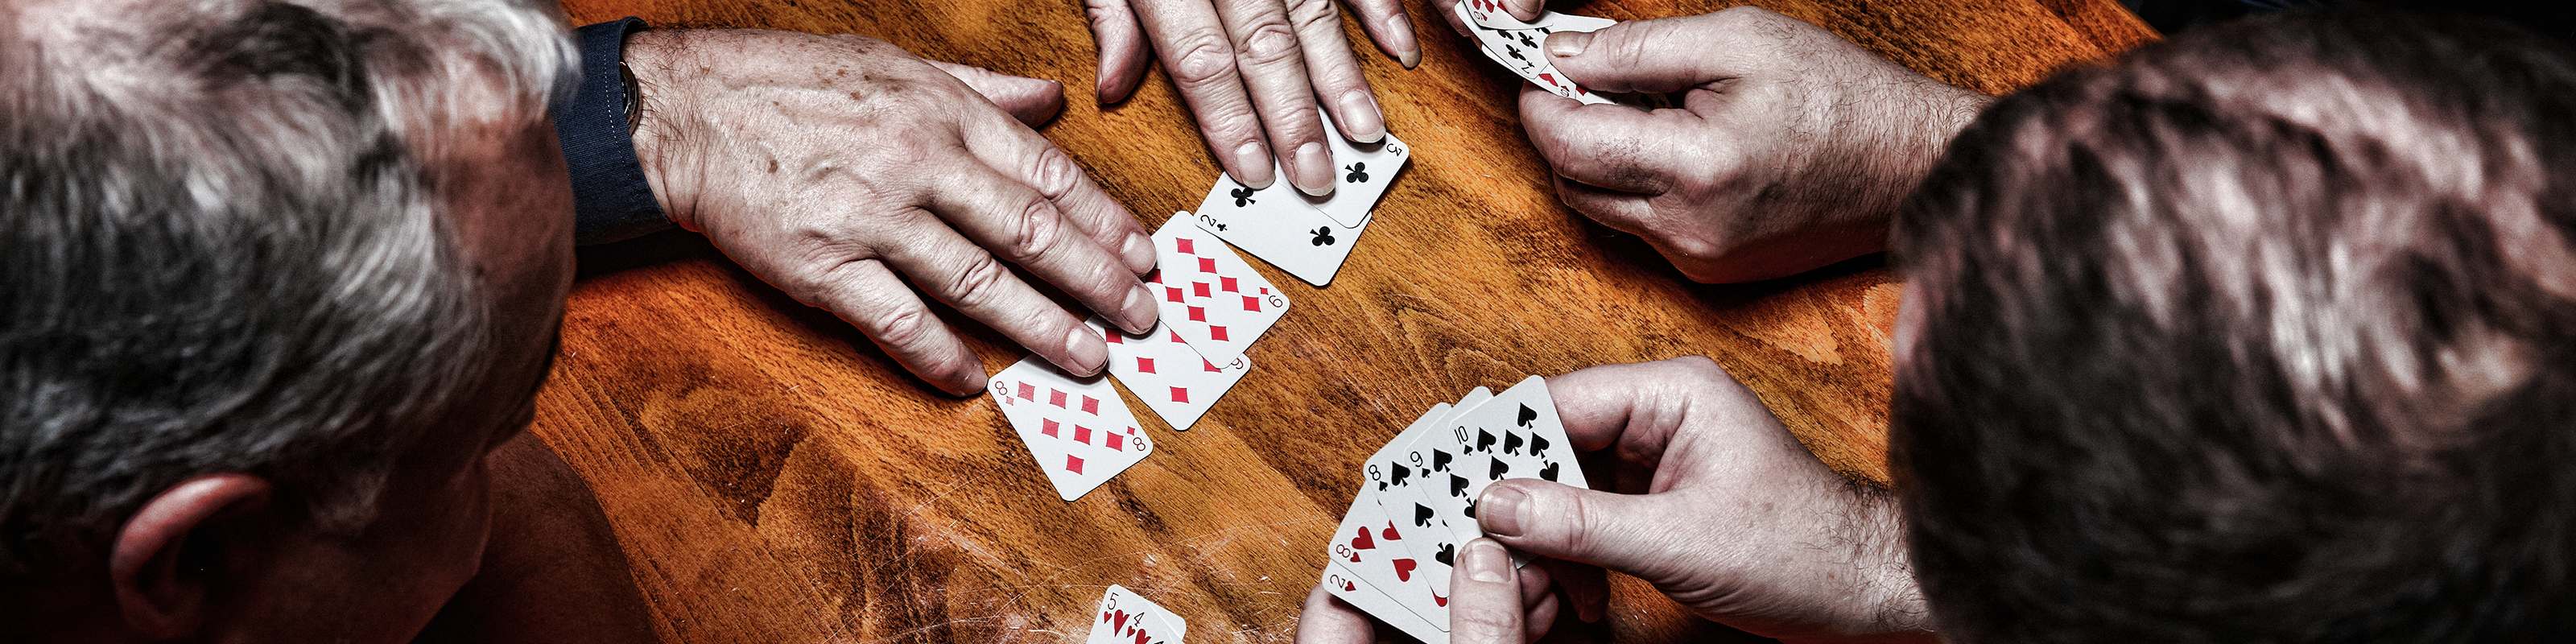 Close-up of hands holding playing cards on a wooden table